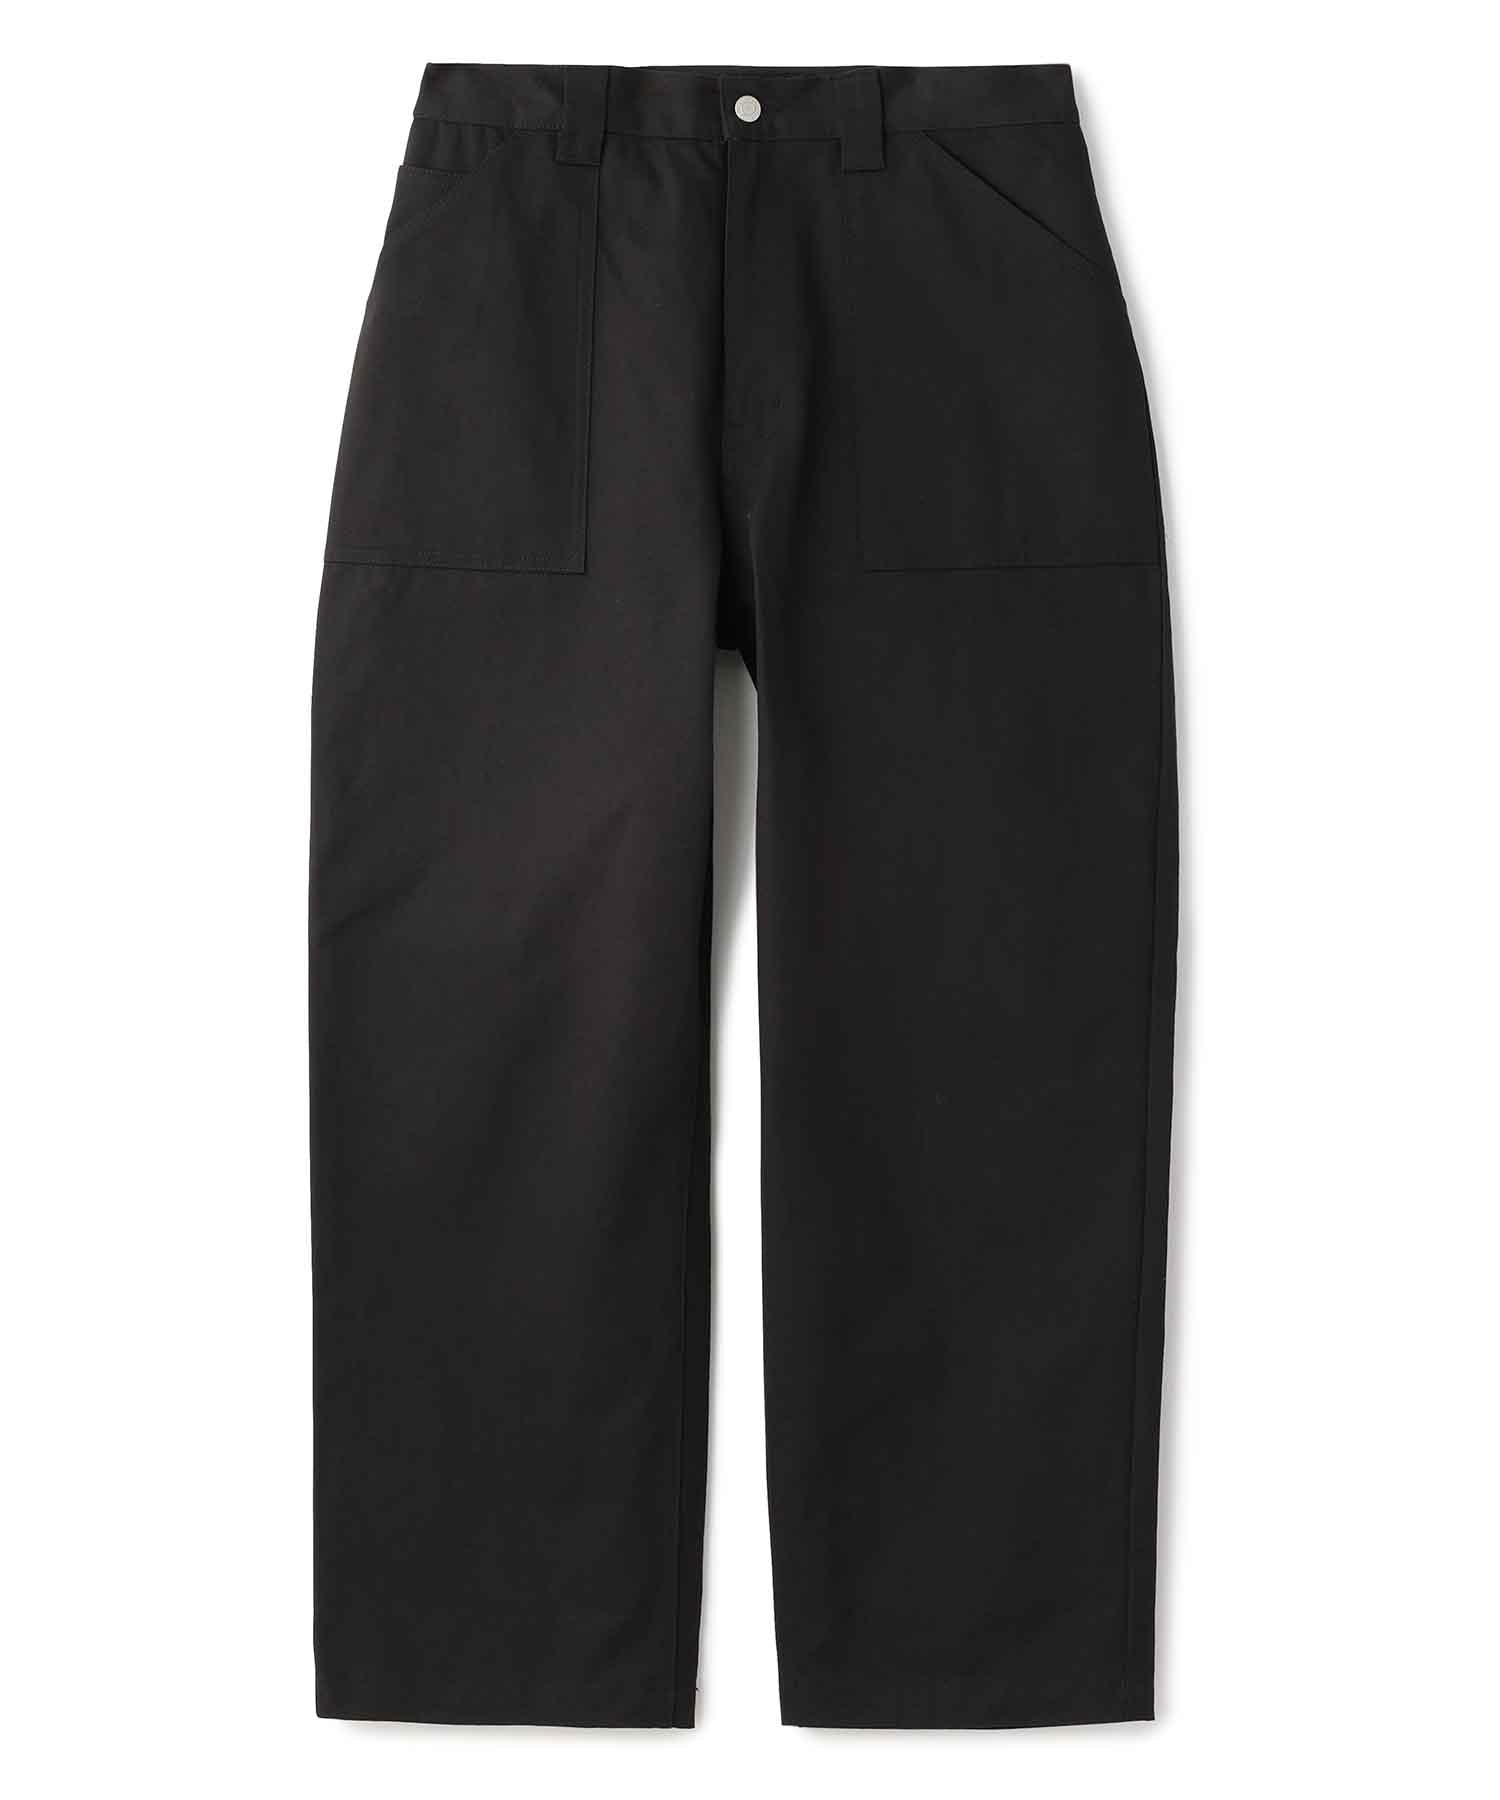 STITCHED BAKER WORK PANTS